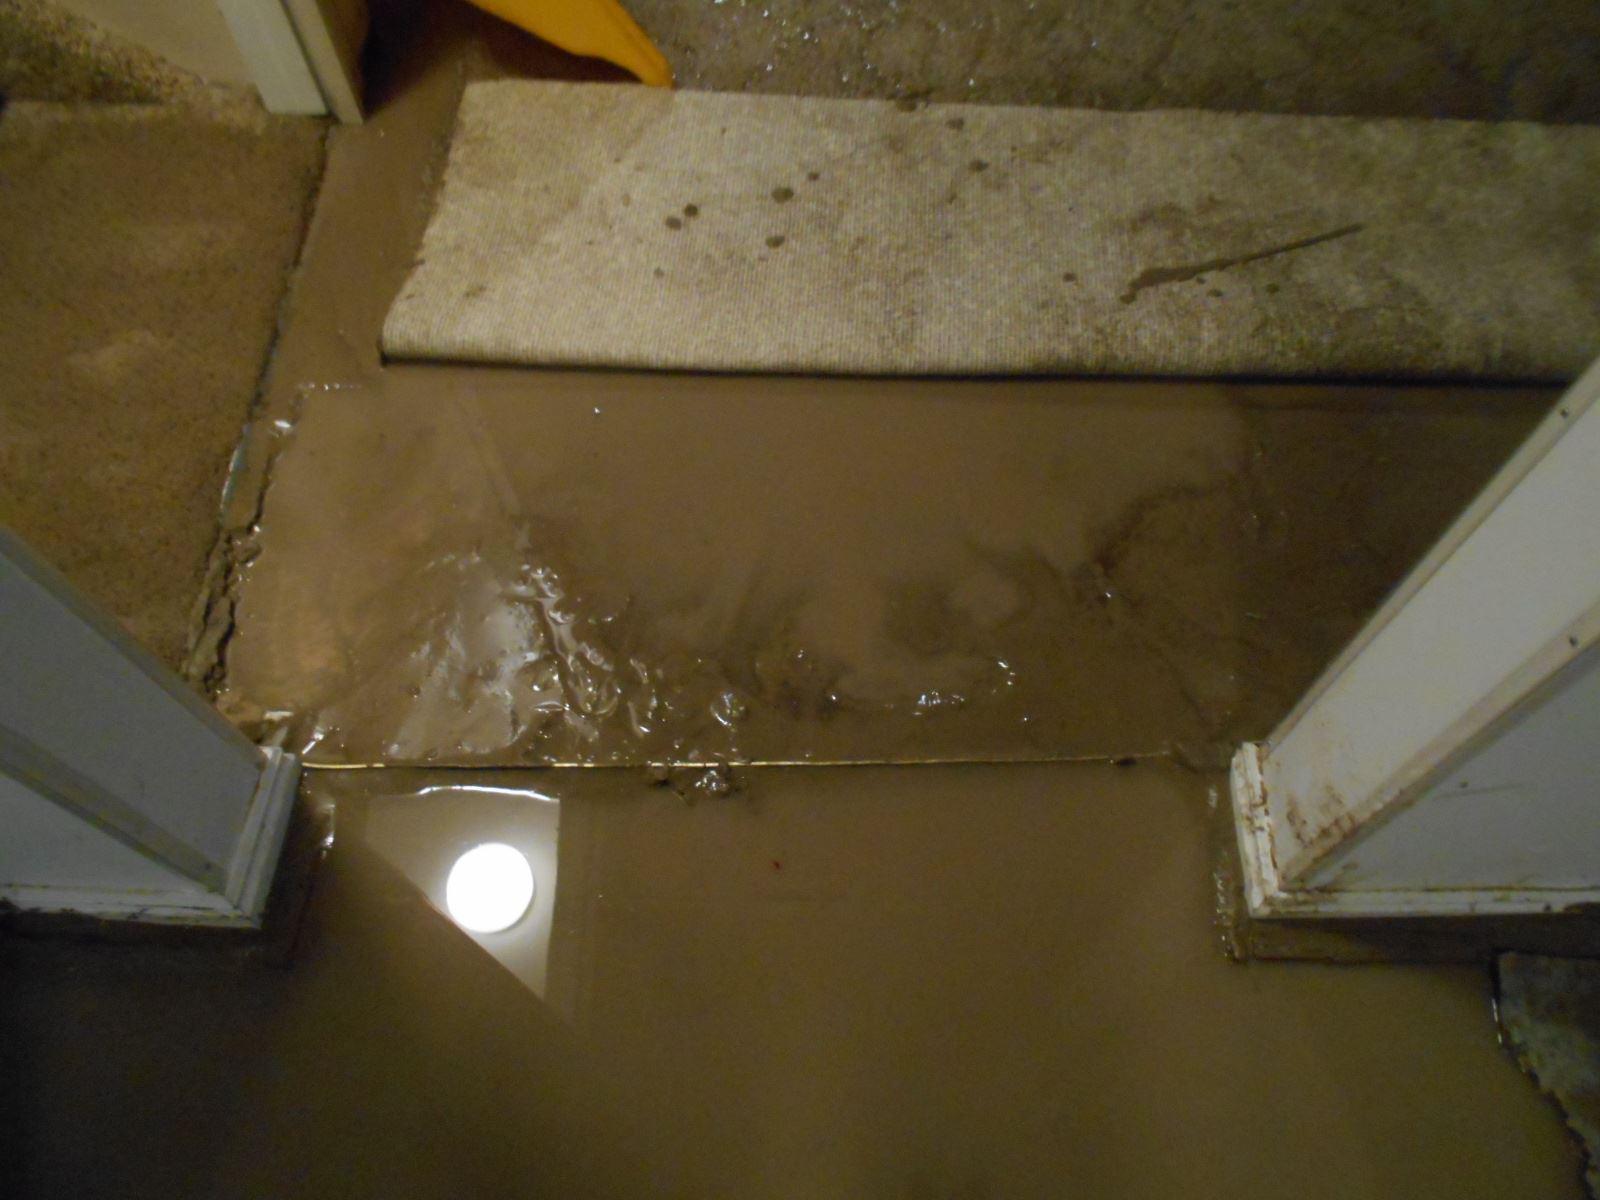 flooded basement water damage cleanup